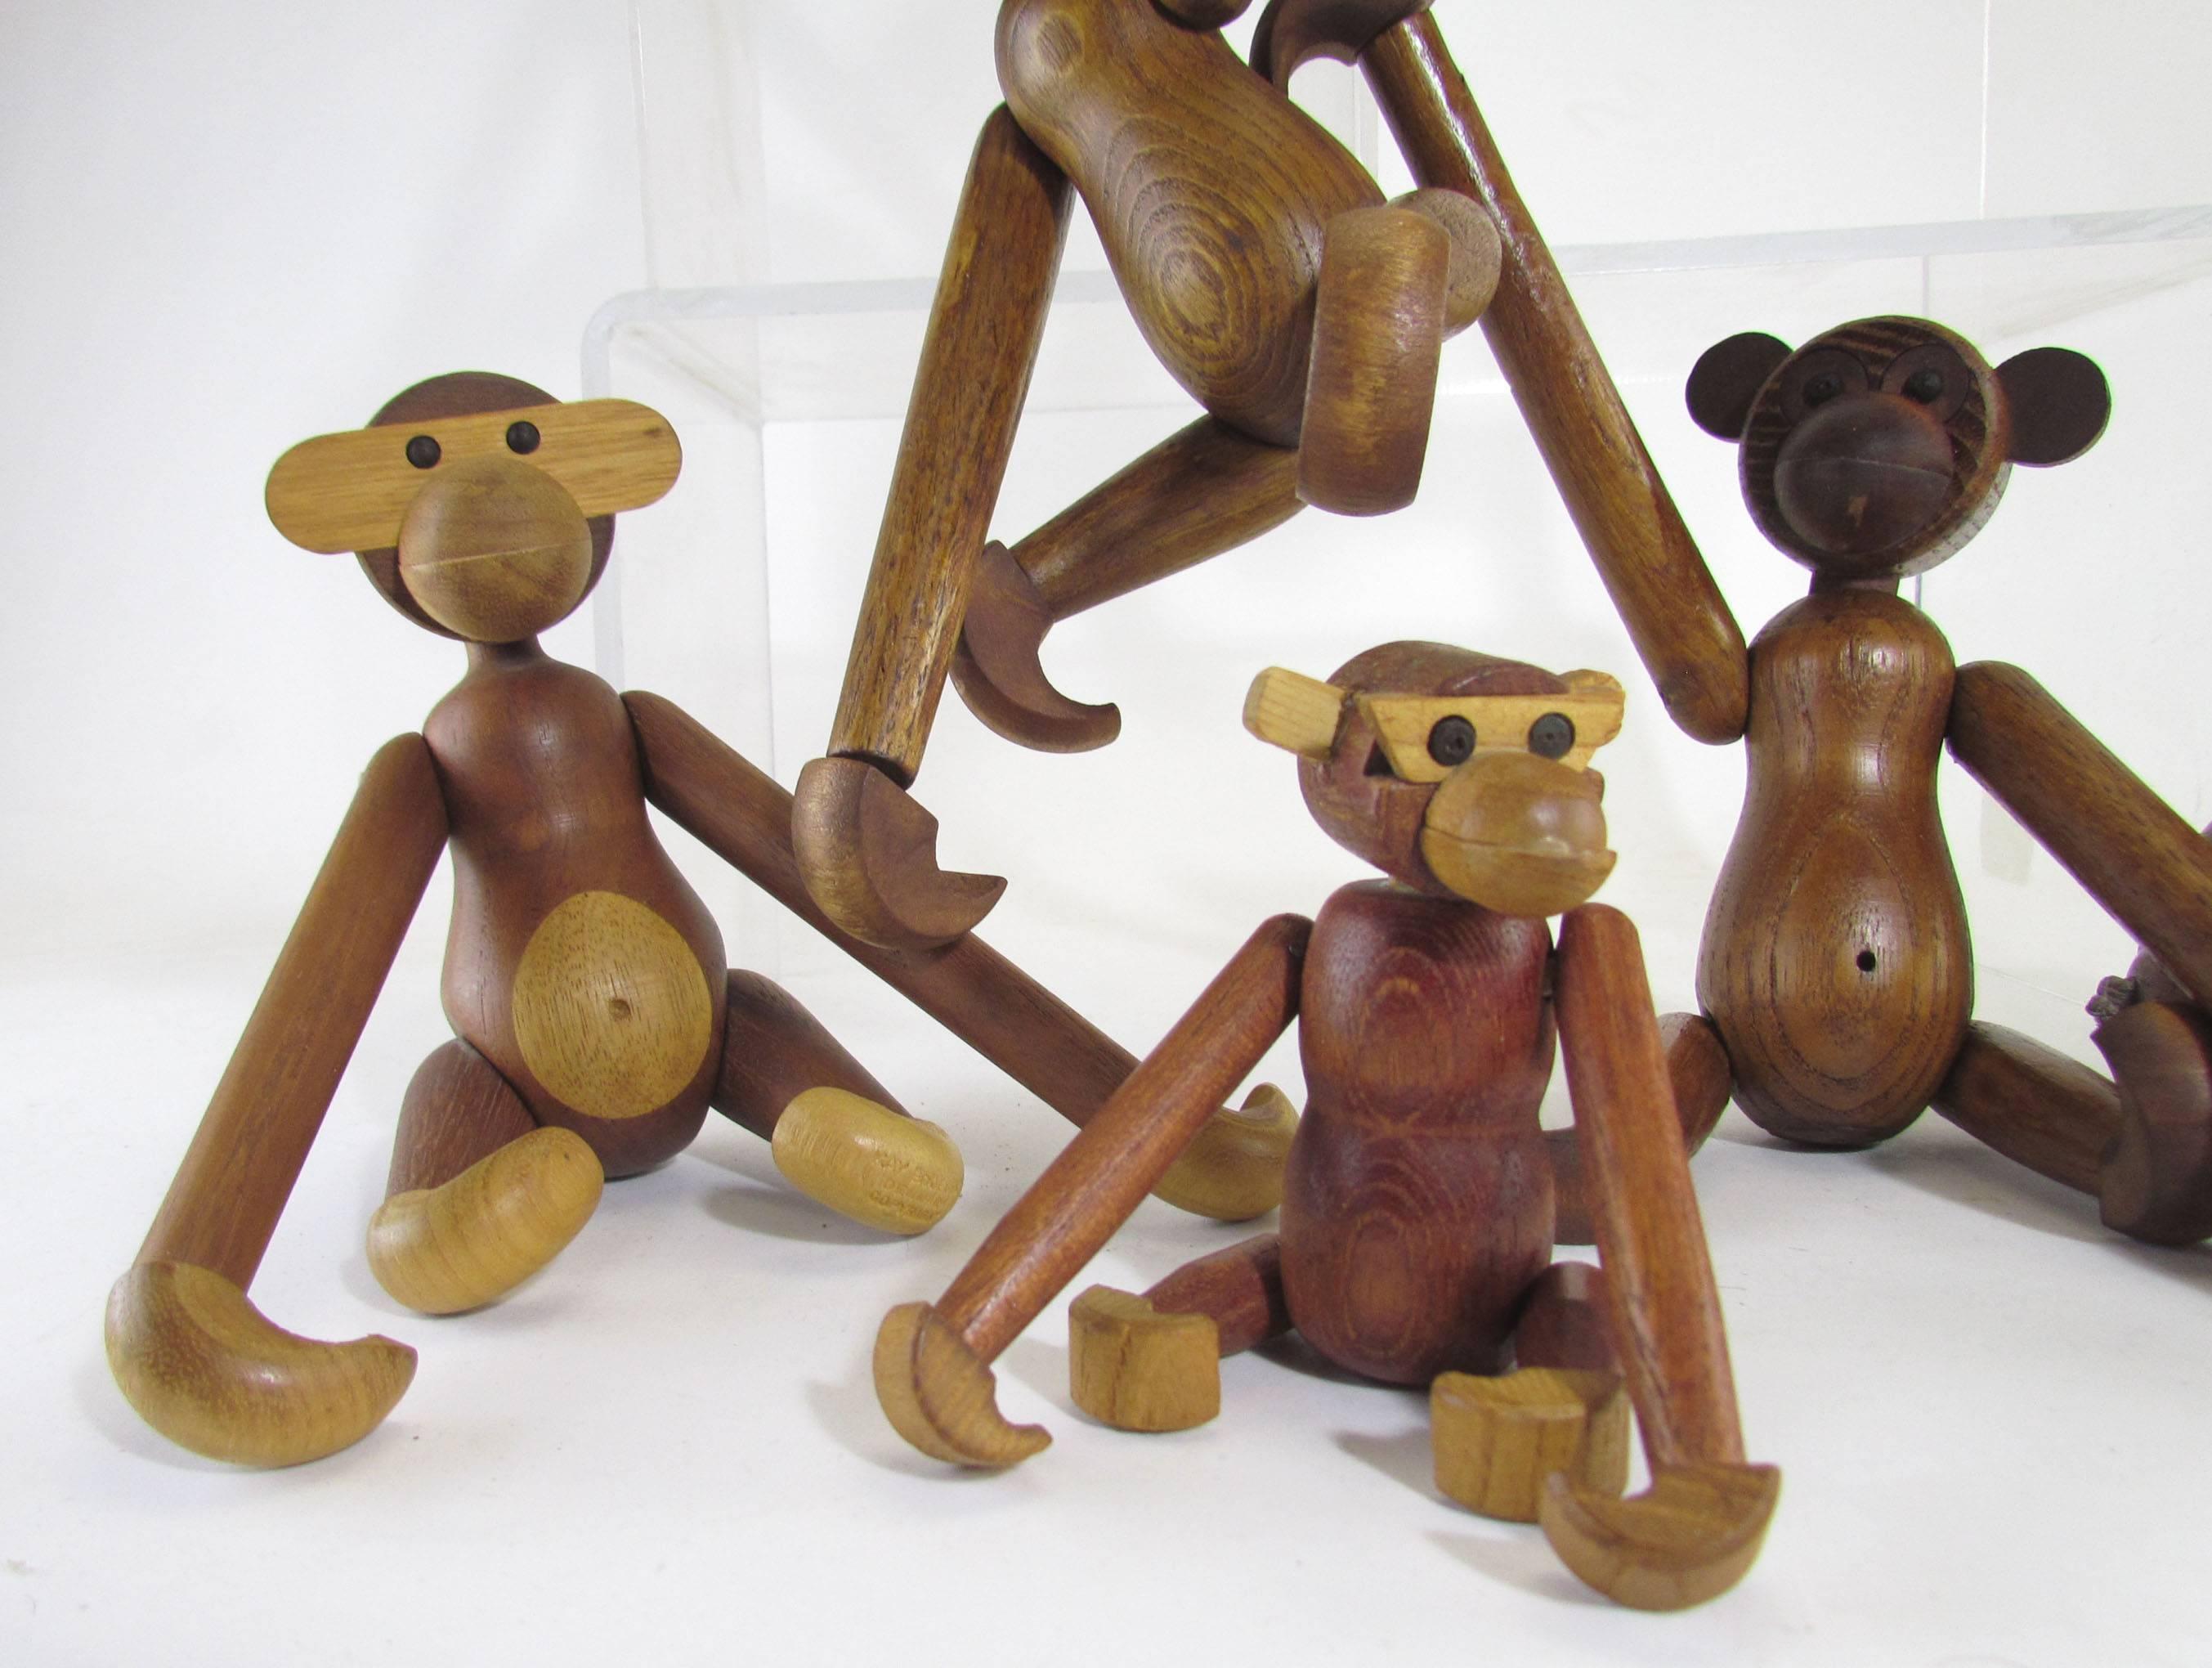 A grouping of seven Mid-Century Modern jointed teak monkey toys, circa 1960s. Two are by Kay Bojesen, Denmark. The others are period Japanese adaptations clearly inspired by that iconic Danish design. The smallest one is 4 1/2